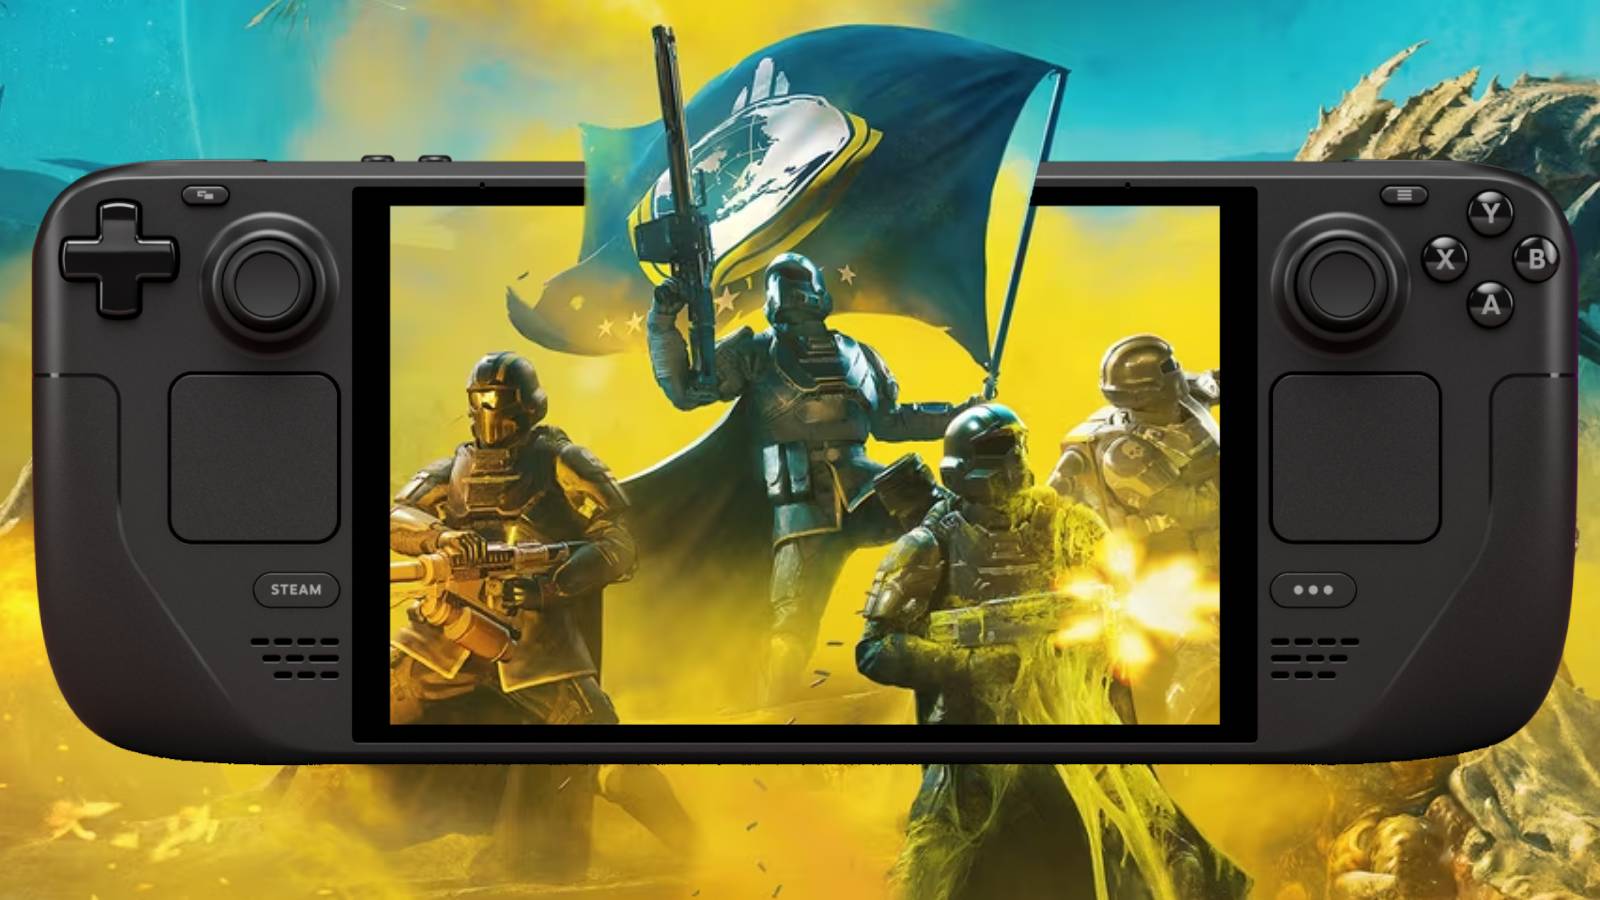 Key-art from Helldivers 2 on the screen of a Steam Deck OLED.